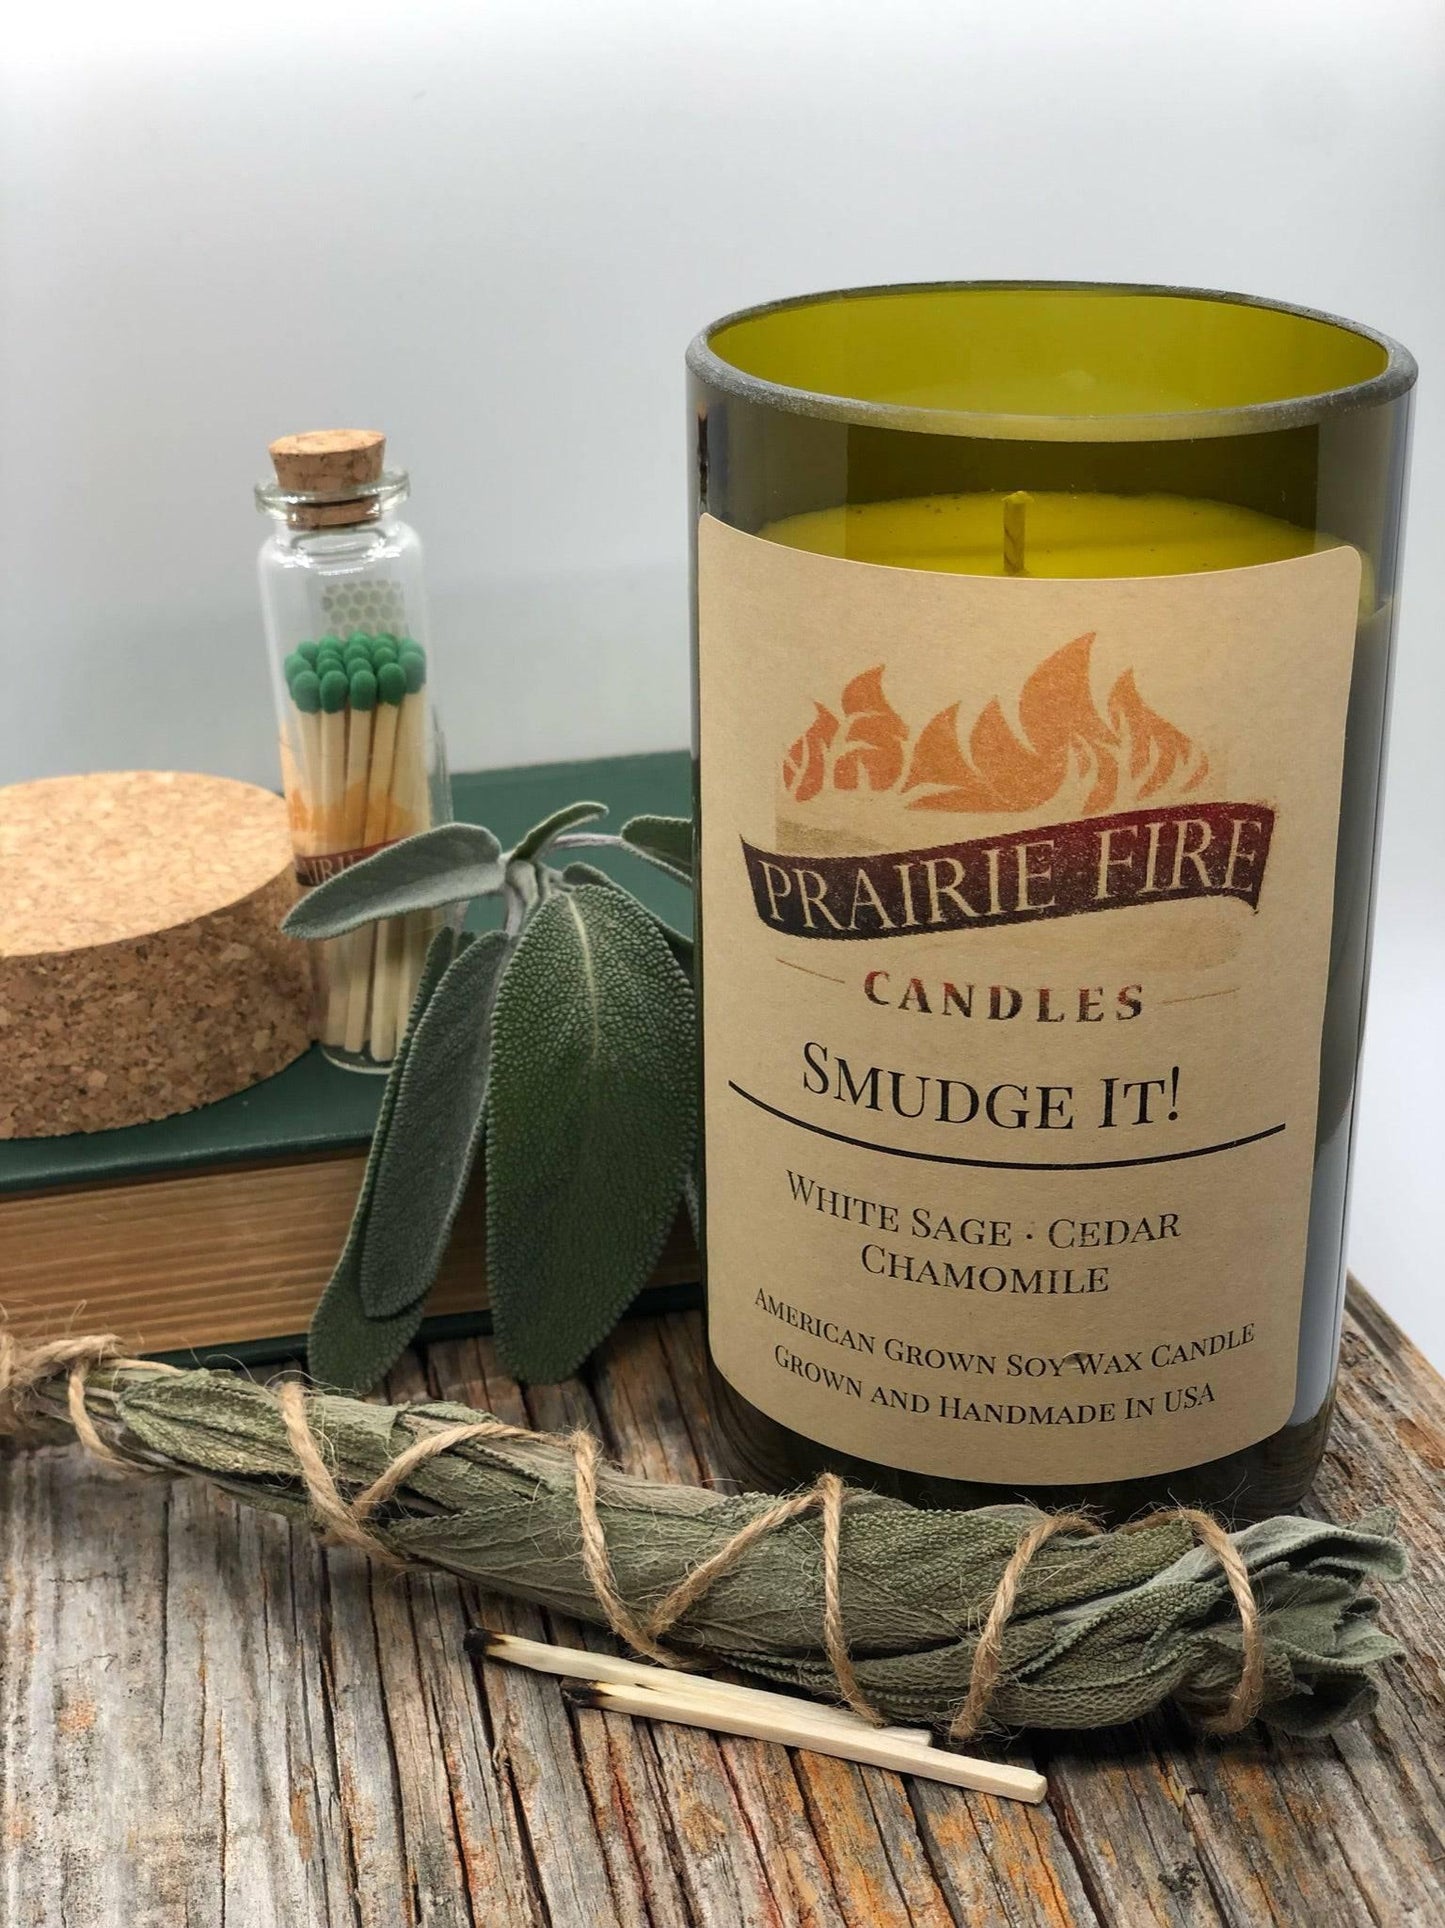 Smudge It! Soy Wax Candle | Repurposed Wine Bottle Candle Natural Cork | Handmade in USA Candle | Eco-Friendly Candle | Non-Toxic Soy Candle - Prairie Fire Candles